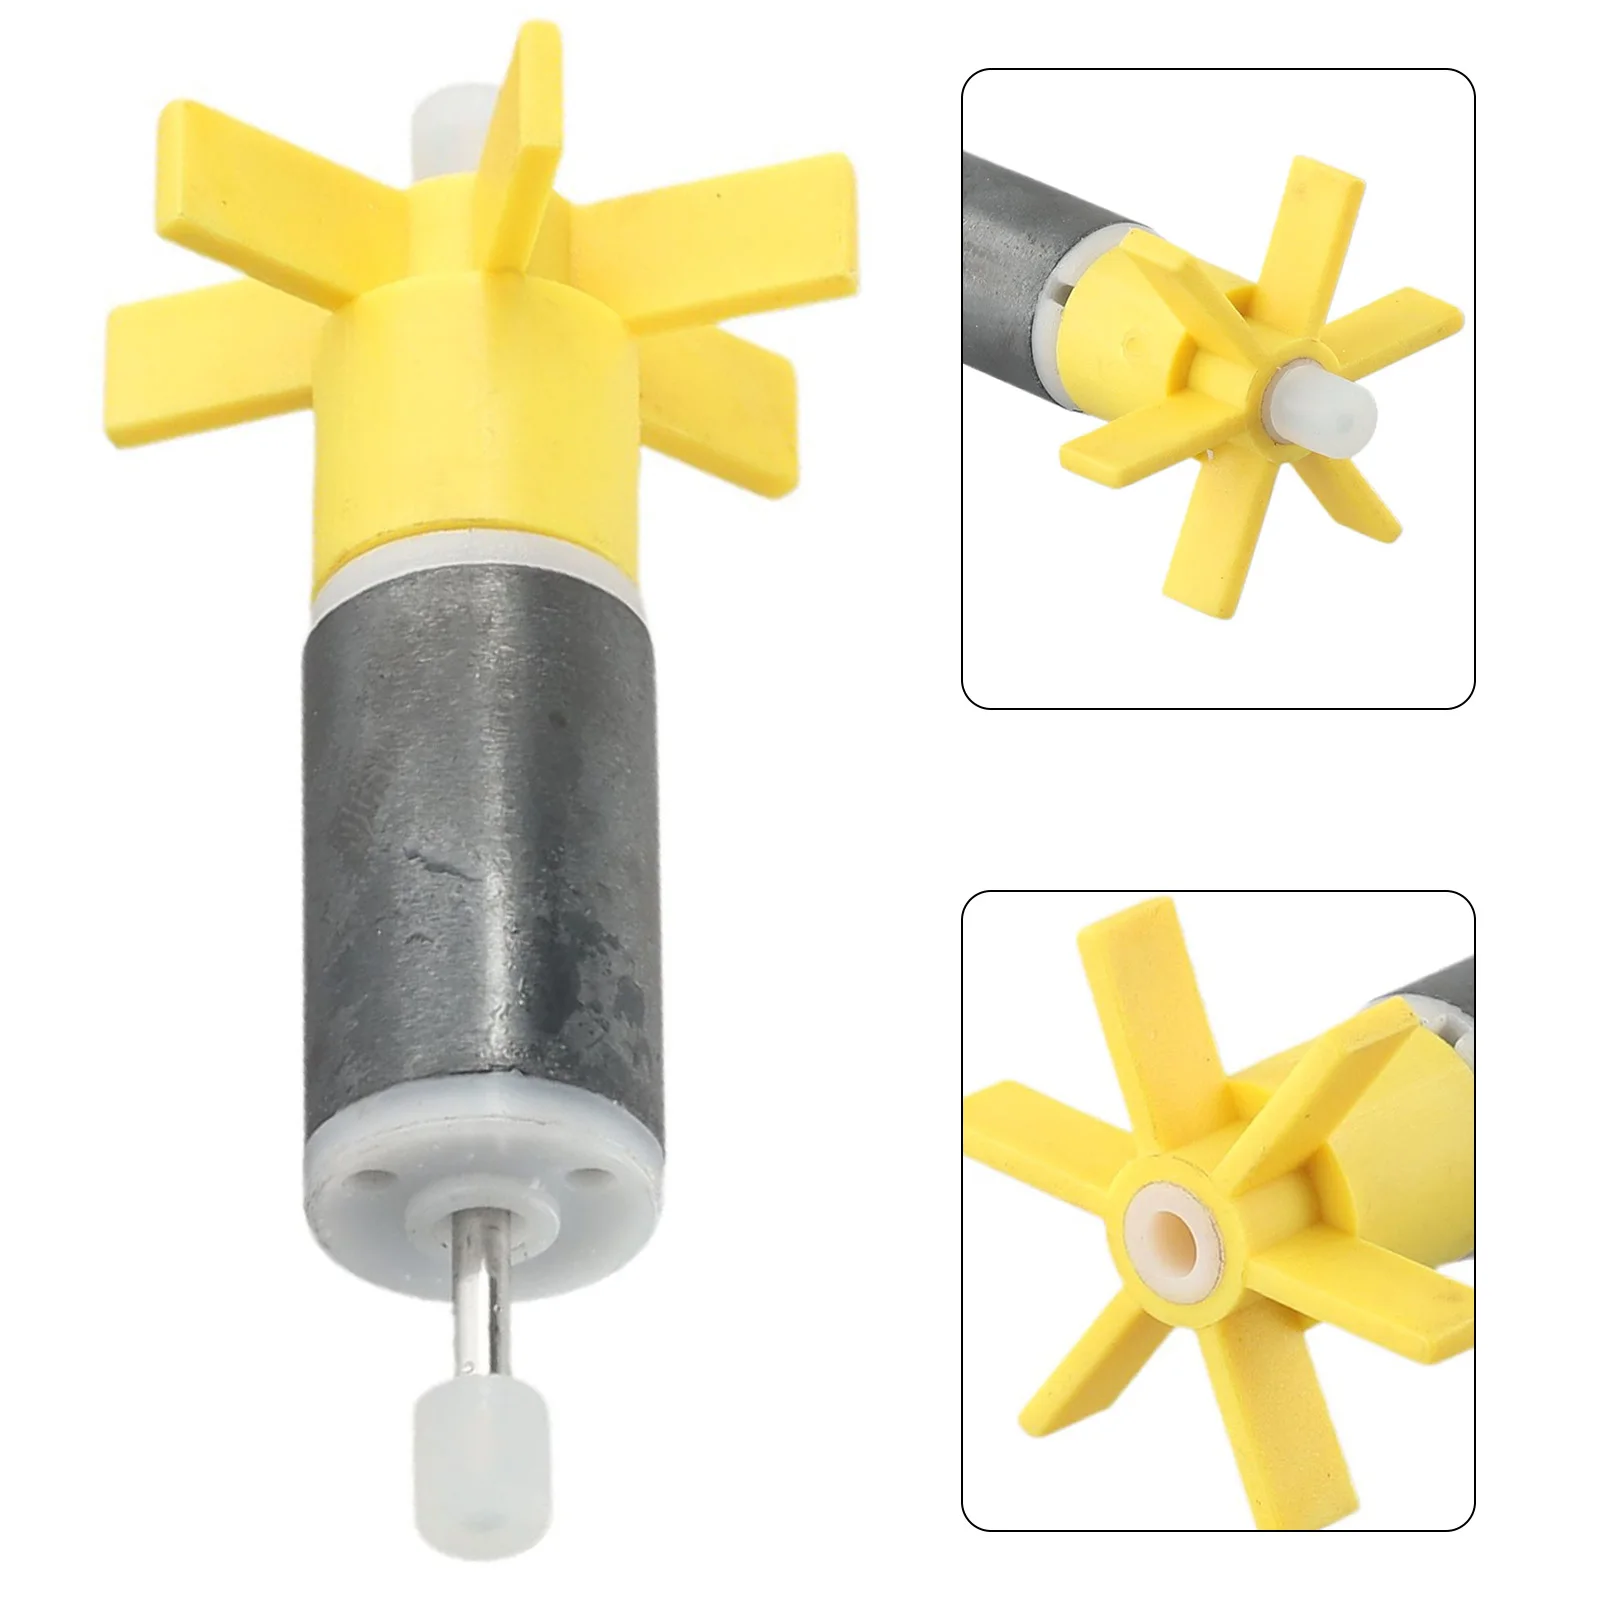 

For Intex Pure Spa Impeller Plastic Pump Rotor Fish Tank For Water Pump Stainless Steel Shaft Yellow High Quality